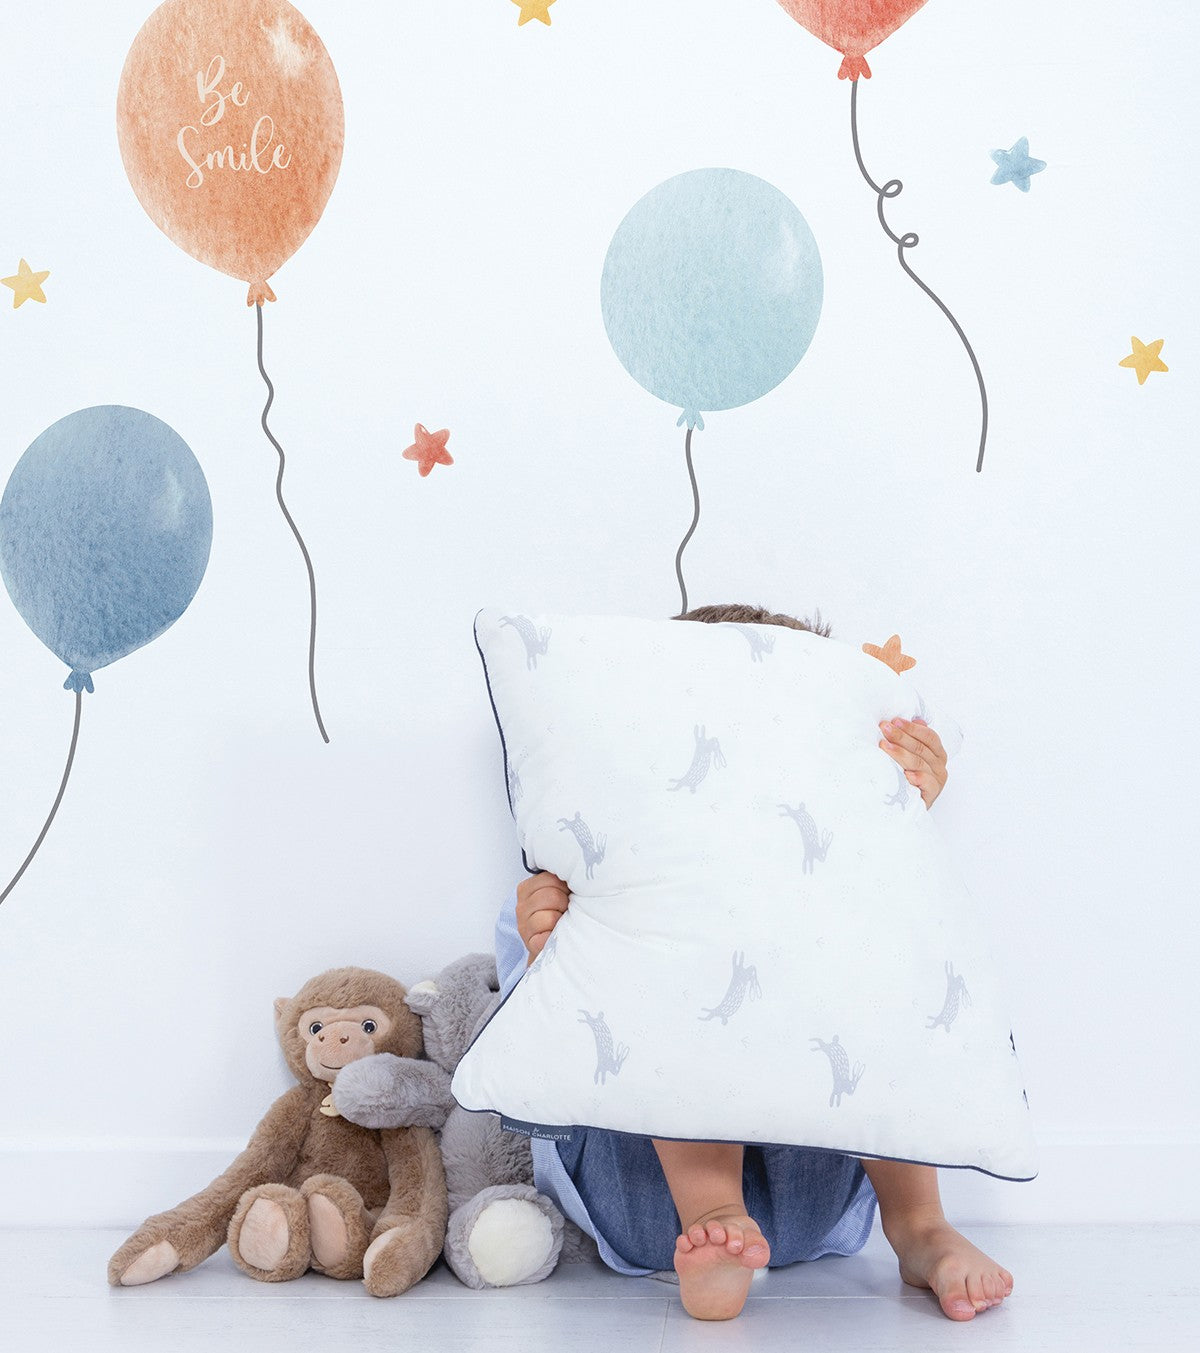 GENTLE FRIENDS - Wall decals Walls - Large balloons